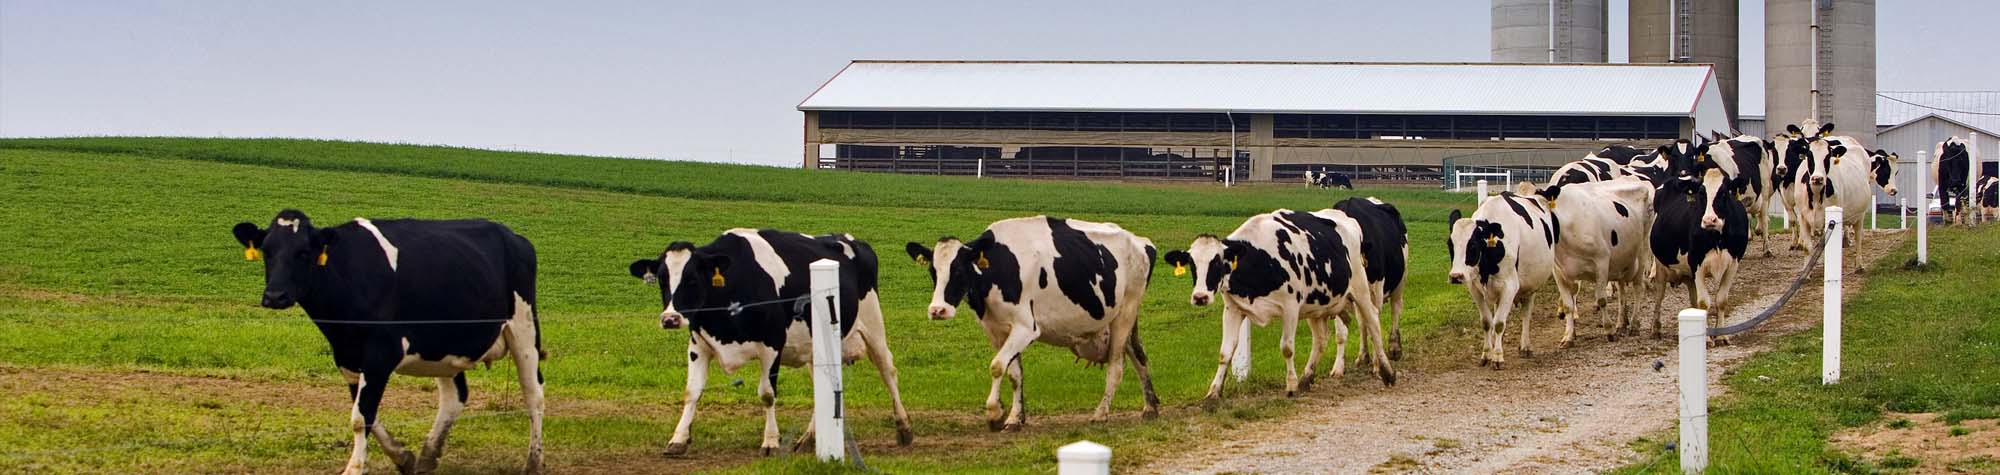 https://leafpestcontrol.com/wp-content/uploads/2019/04/Dairy-Agriculture-Header